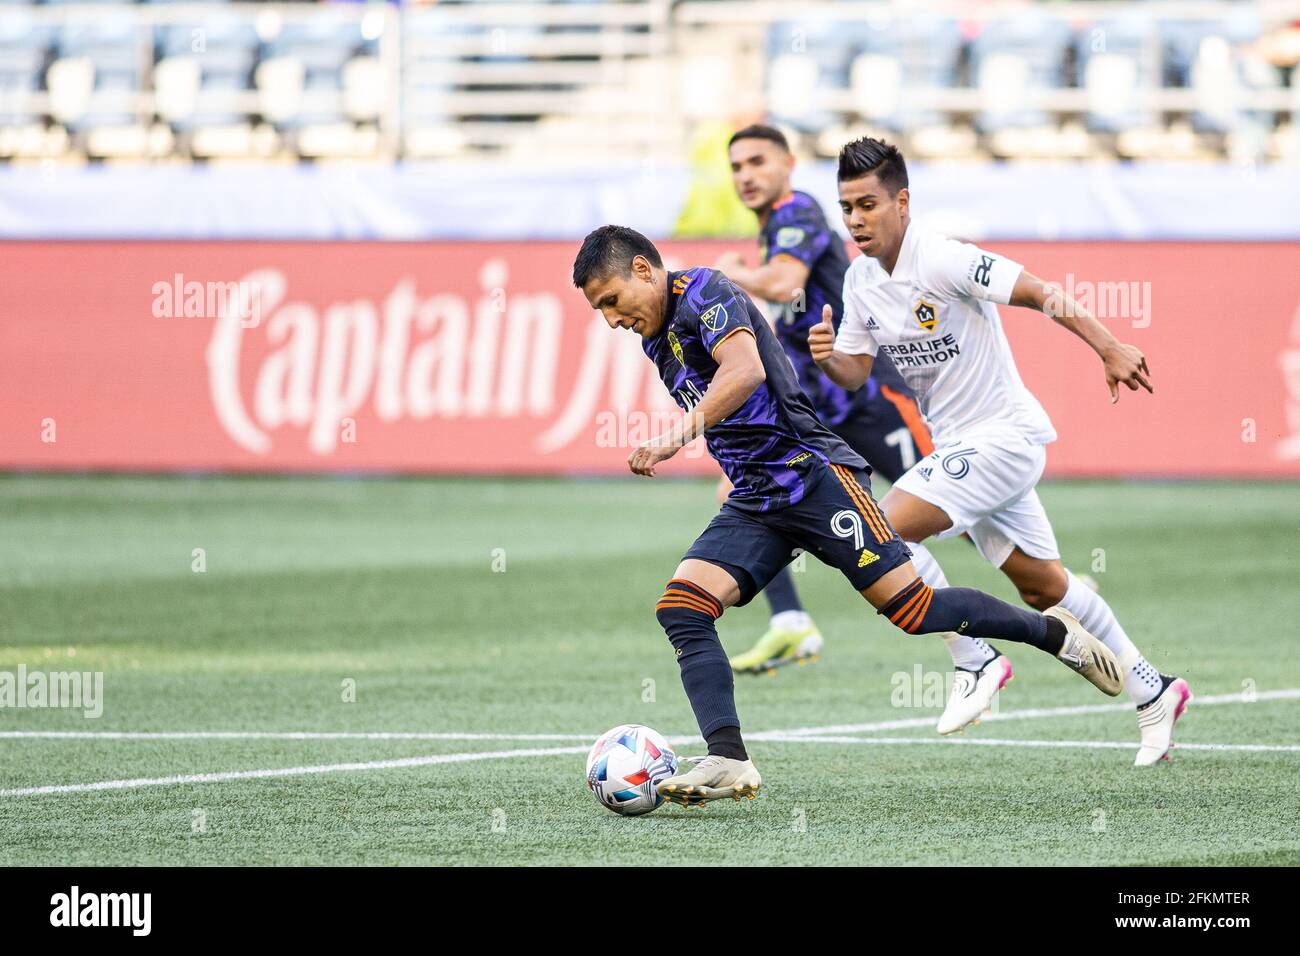 Seattle Sounders forward Raul Ruidiaz (9) controlling the ball against LA Galaxy midfielder Efrain Alvarez (26) during the first half of an MLS match Stock Photo